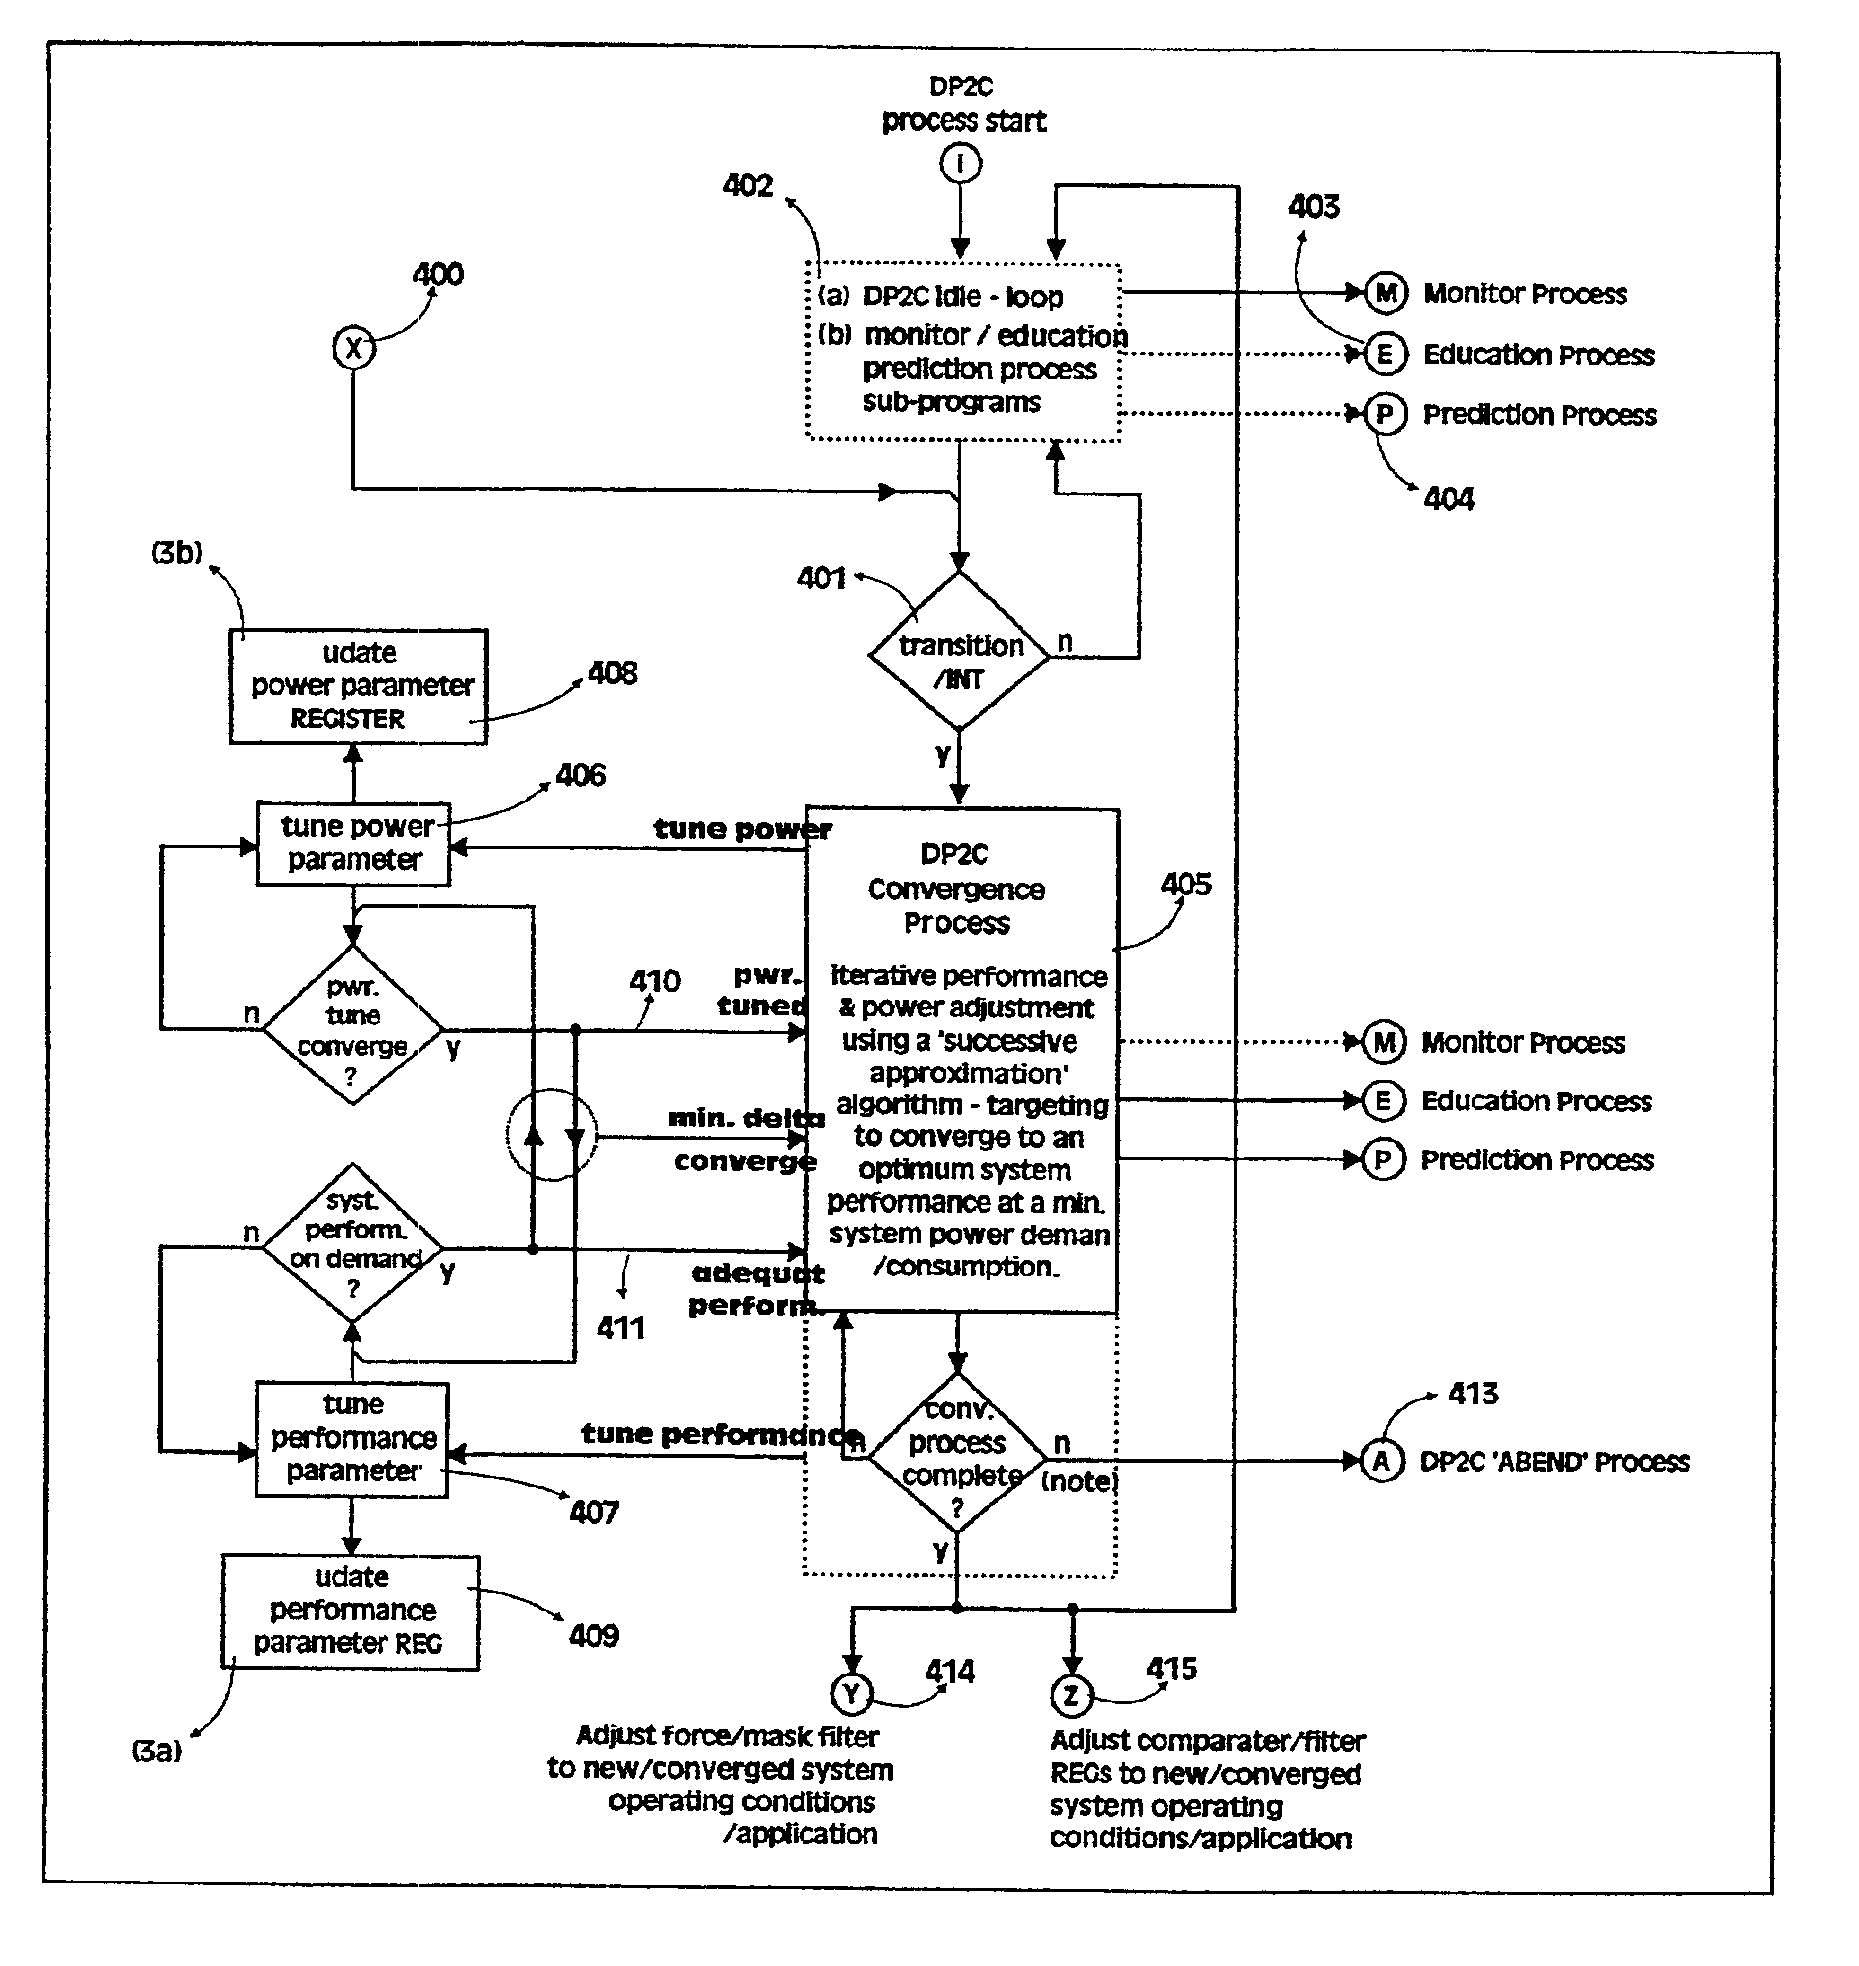 System and method for converging current system performance and power levels to levels stored in a table using a successive approximation algorithm